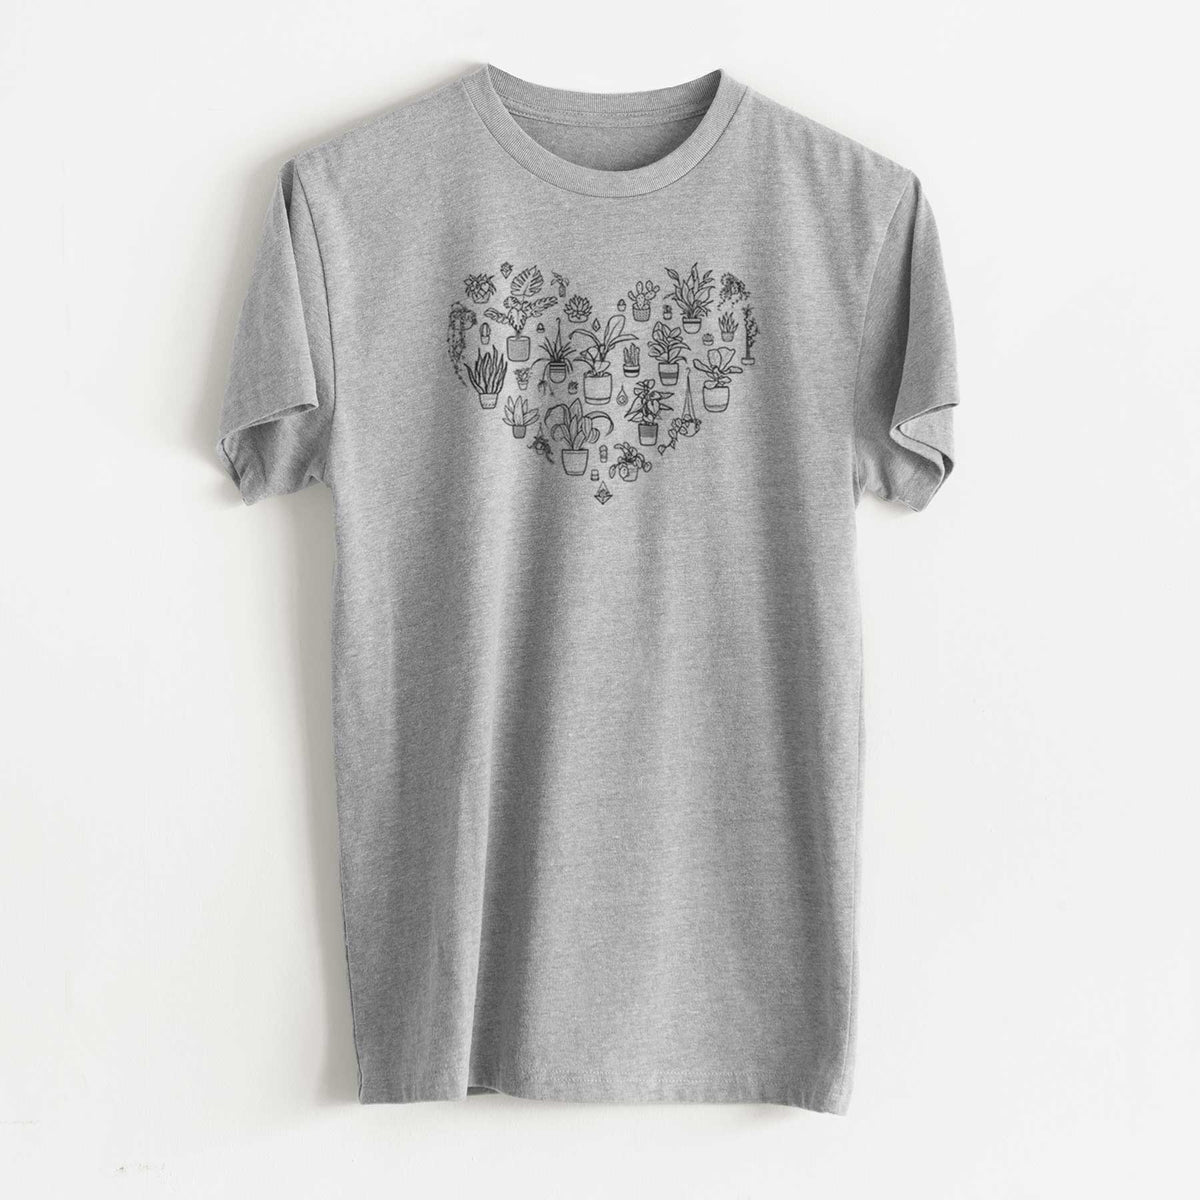 Heart Full of House Plants - Unisex Recycled Eco Tee  - CLOSEOUT - FINAL SALE